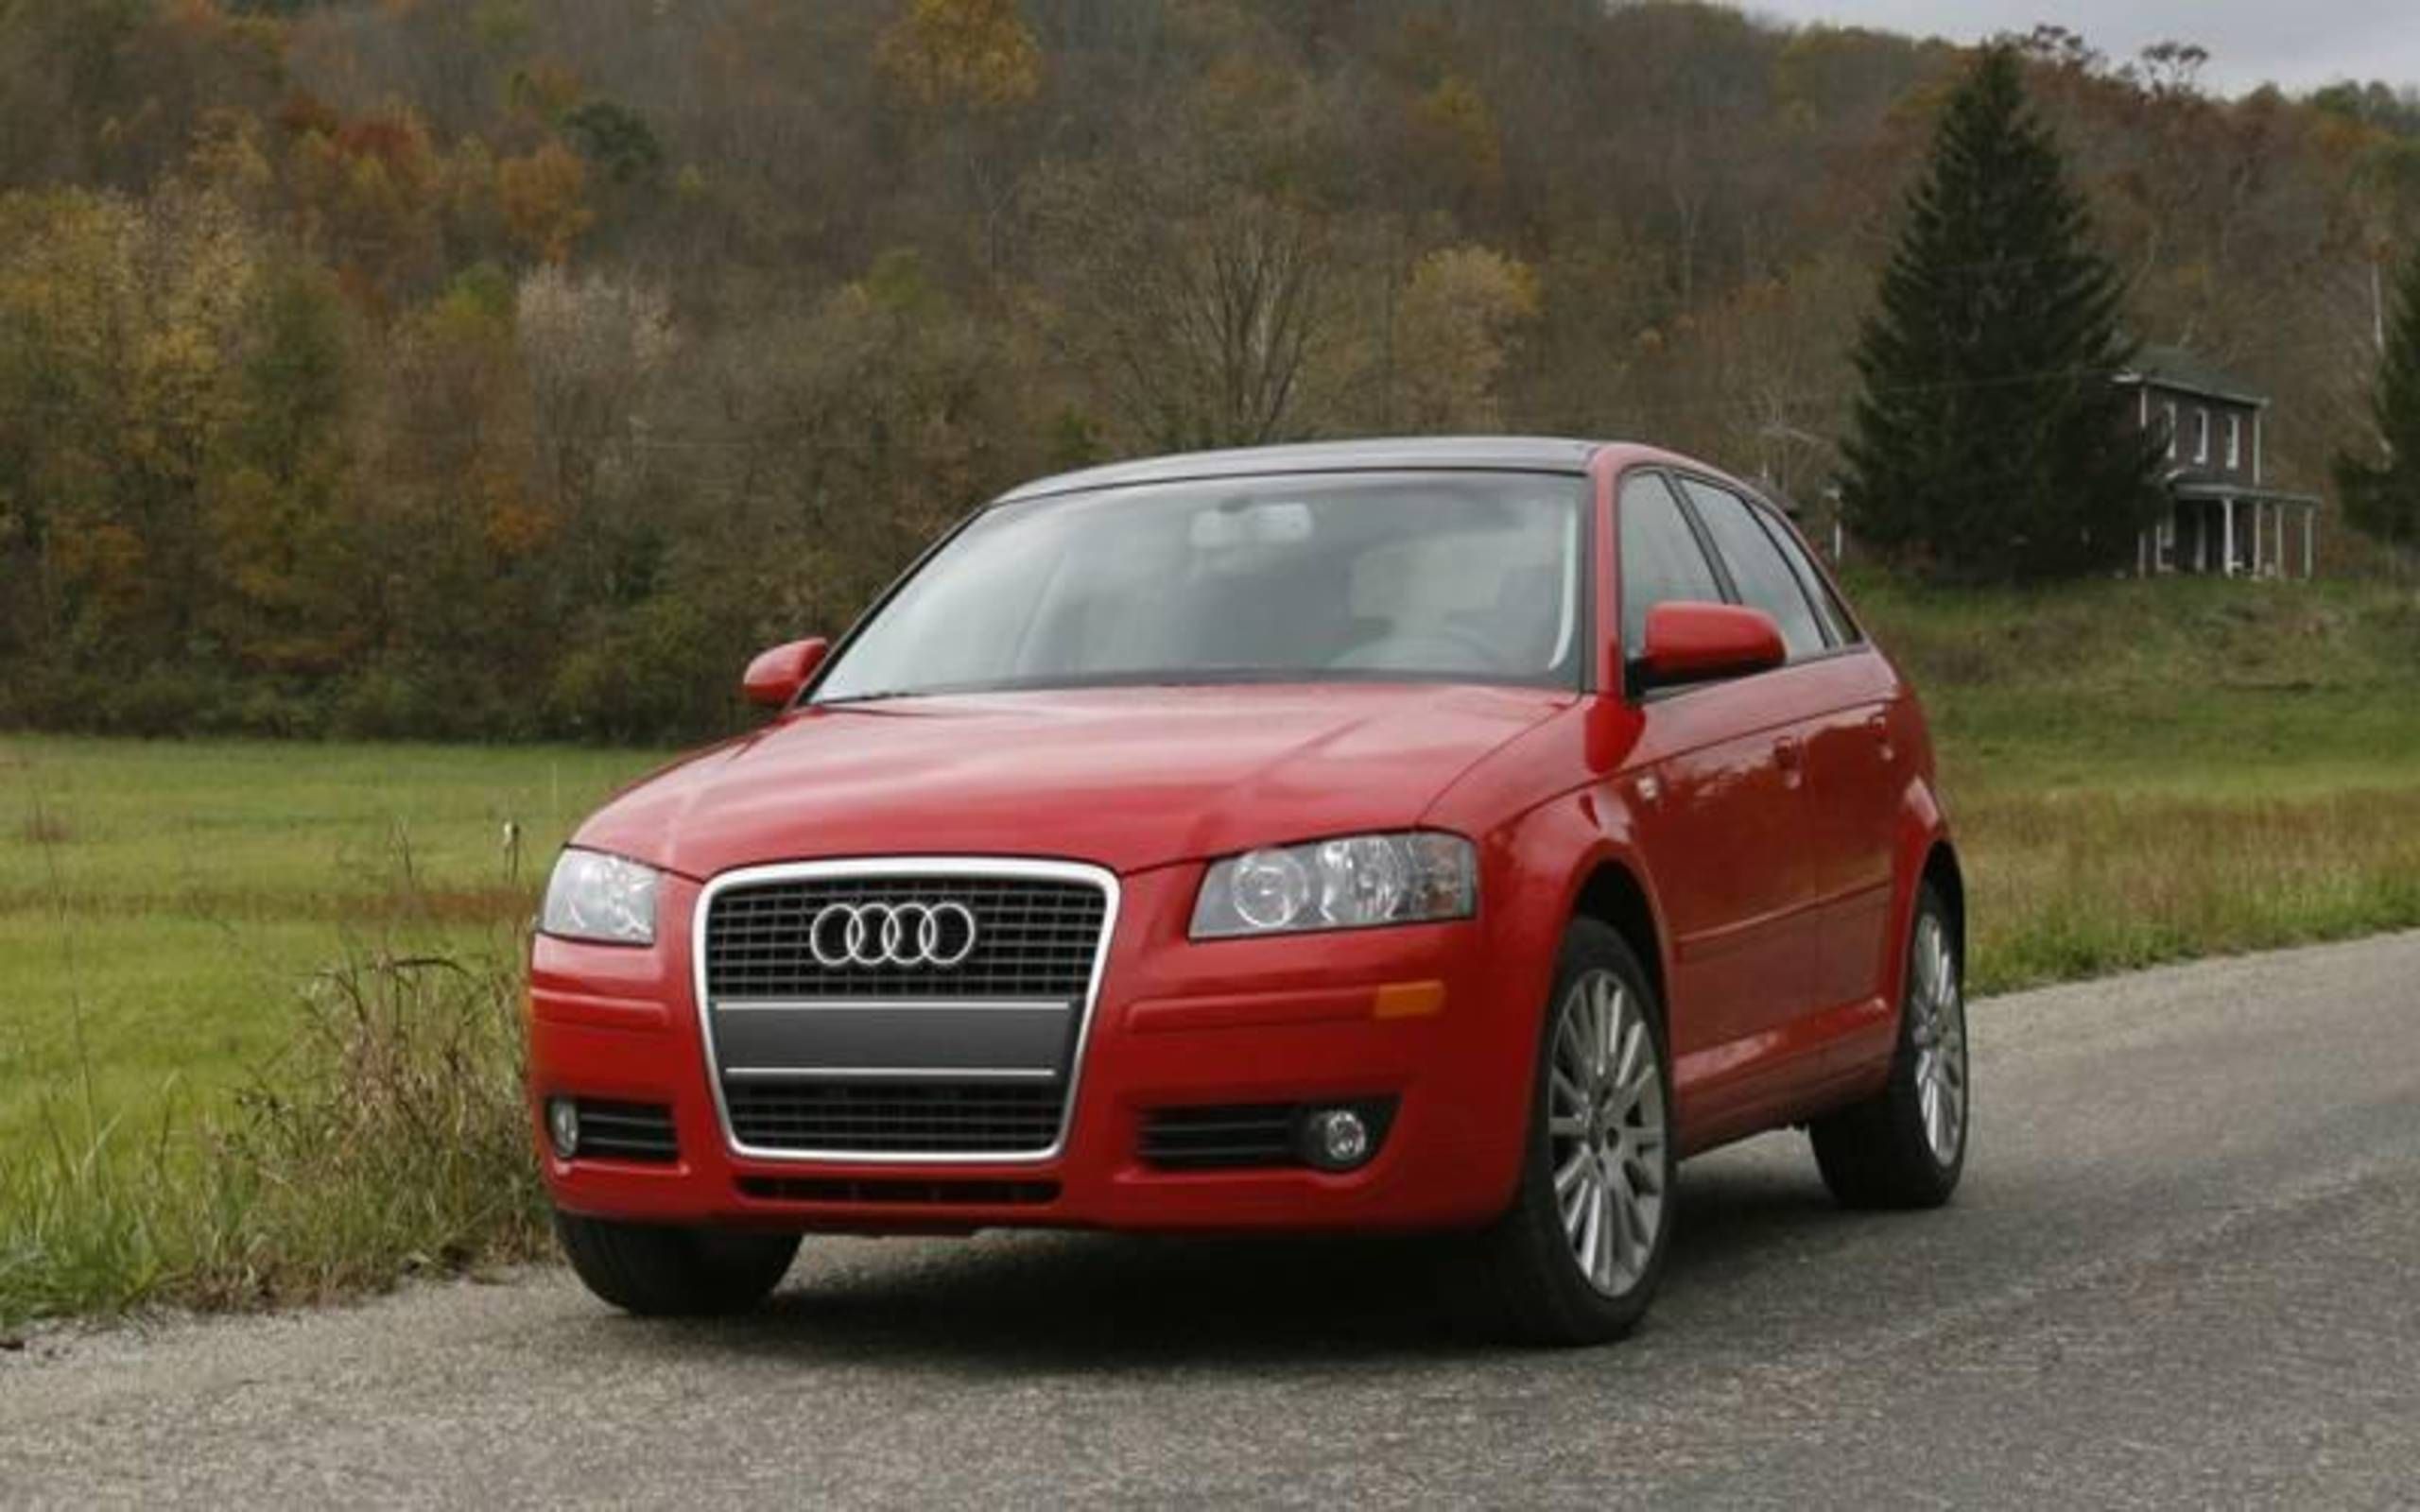 2006 Audi A3 2.0T — Wrap-Up: Audi A3's 12-month, nearly trouble-free  service gets two thumbs up